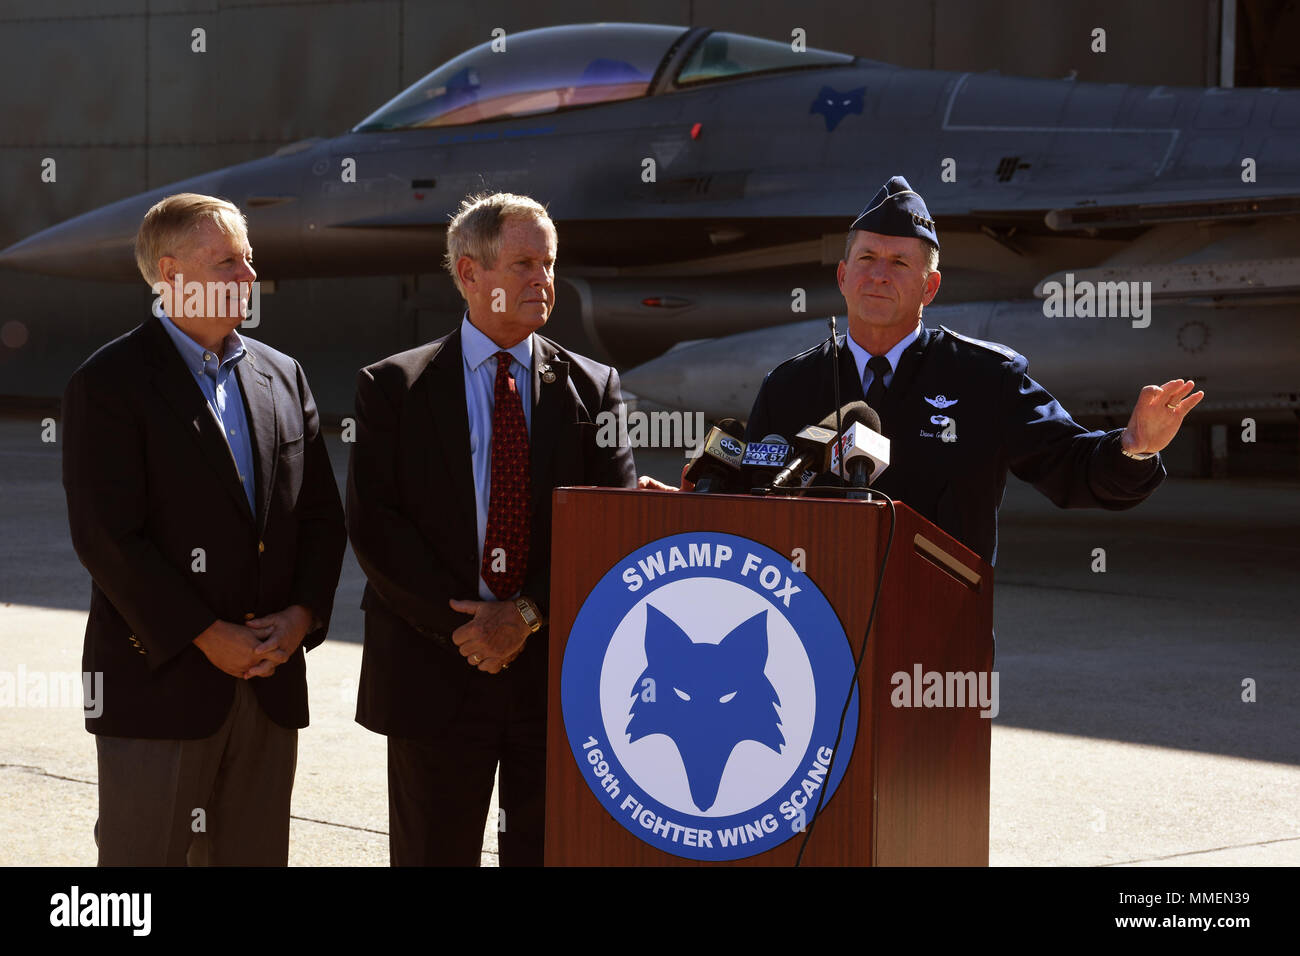 U.S. Air Force Chief of Staff Gen. David L. Goldfein, speaking, U.S. Senator Lindsey Graham, far left, and U.S. Representative Joe Wilson answer questions from the media in front of the main hangar of the South Carolina Air National Guard’s 169th Fighter Wing during a visit to McEntire Joint National Guard Base, S.C., Oct. 27, 2017. This was Goldfein’s first visit to McEntire JNGB as Chief of Staff to meet with Airmen and senior S.C. Air and Army National Guard leaders. (U.S. Air National Guard photo by Senior Master Sgt. Edward Snyder) Stock Photo